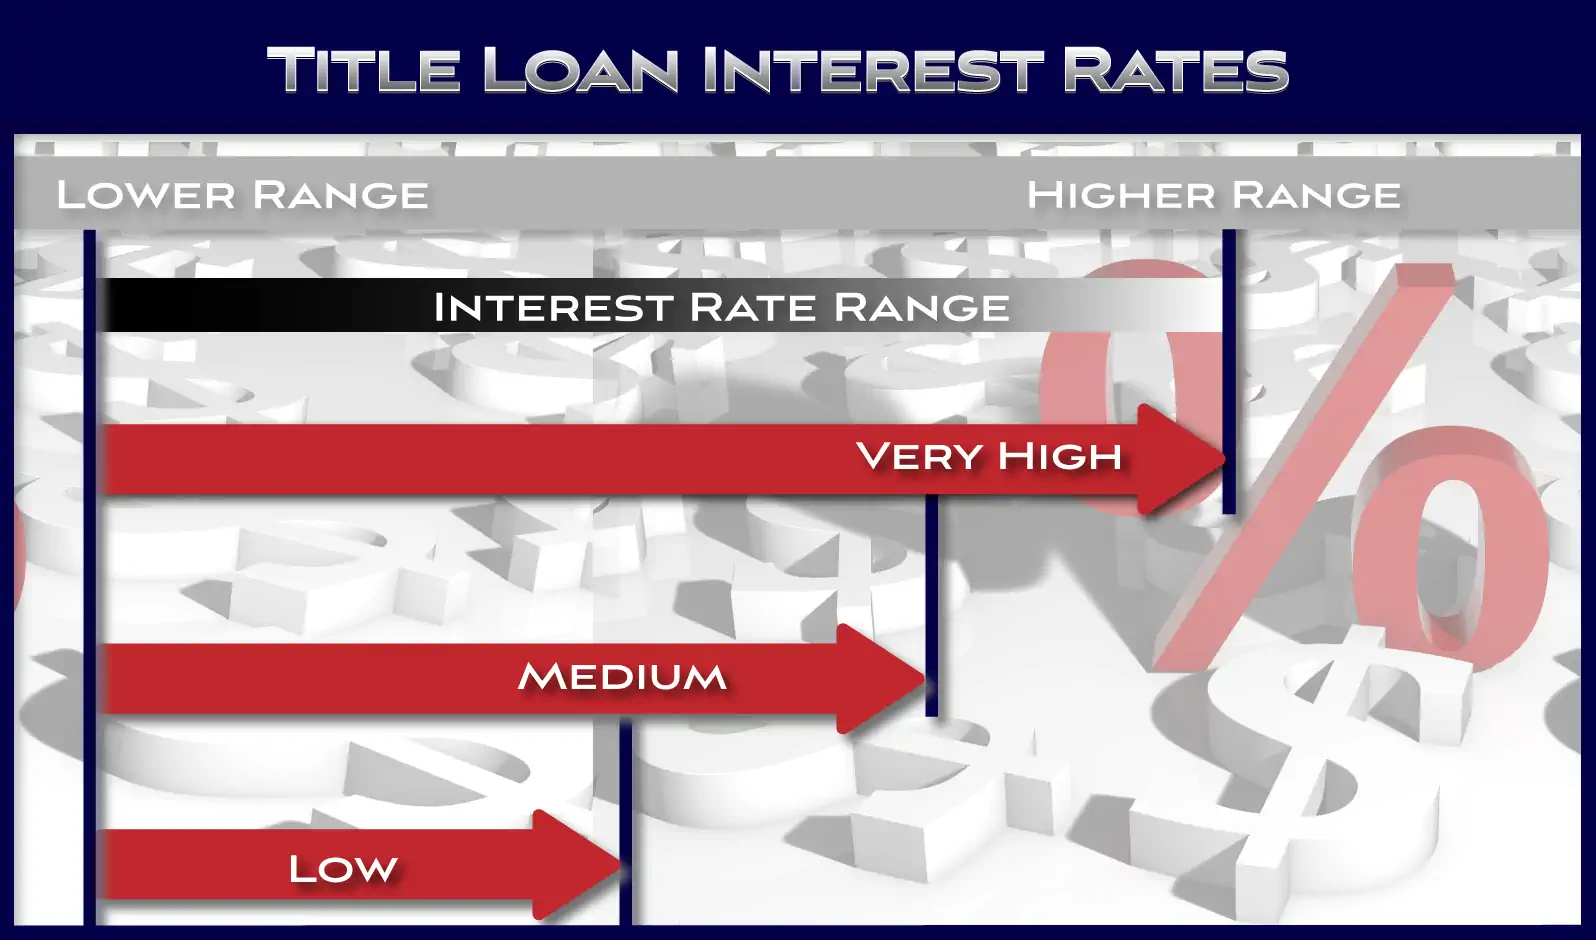 Title Loan Interest Rate ranges - low, medium, very high.